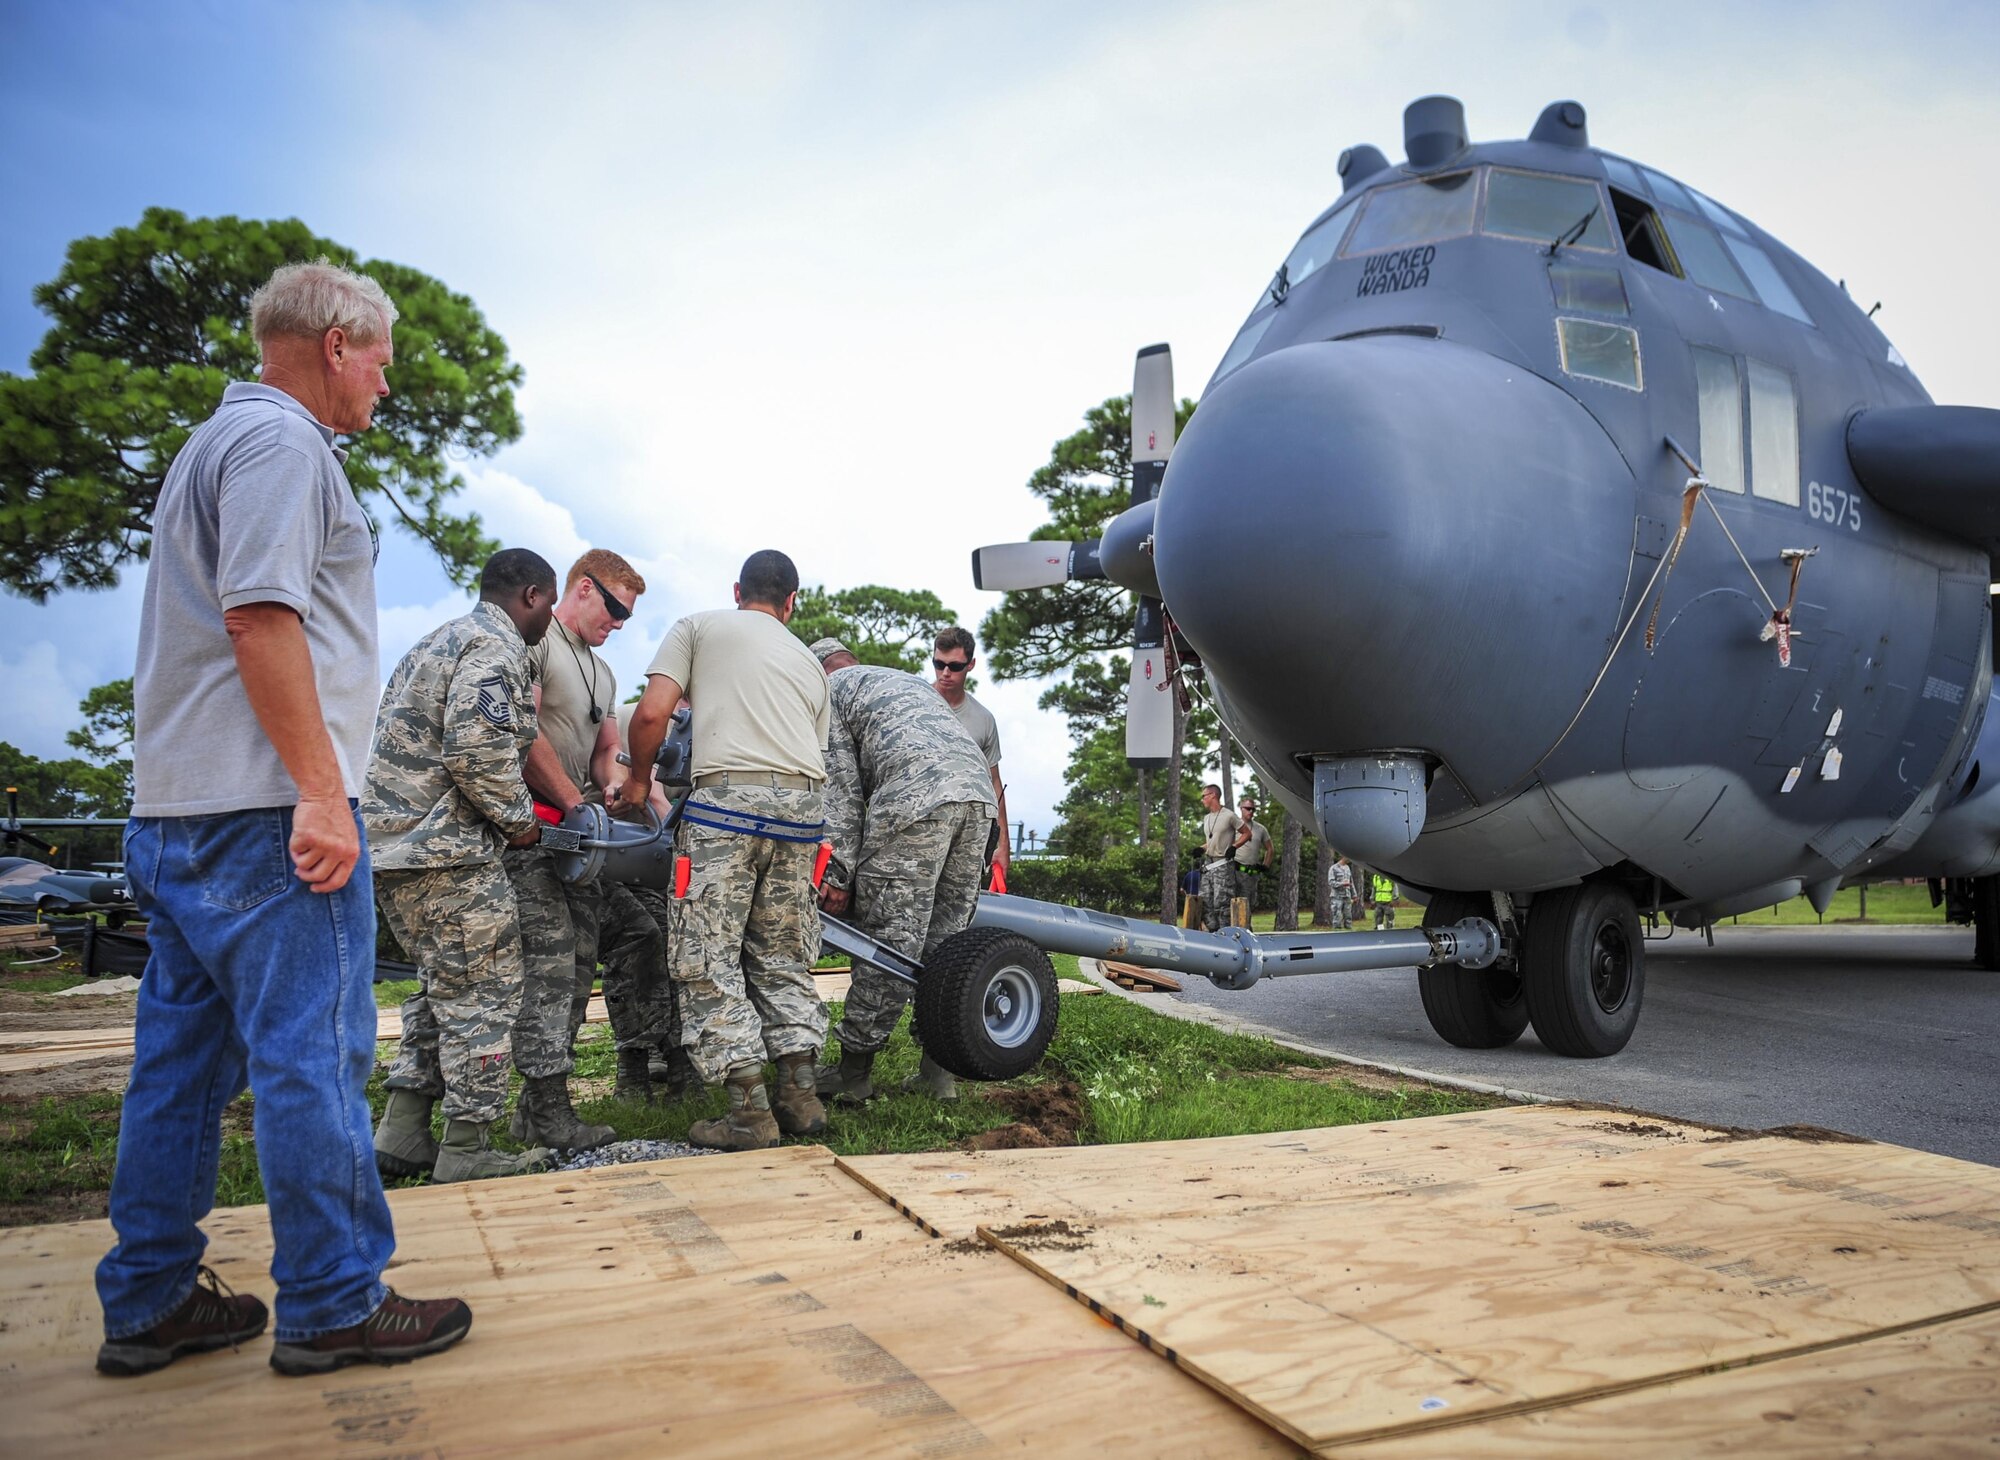 Airmen prepare to move an AC-130H Spectre into the Air Park on Hurlburt Field, Fla., Aug. 15, 2015. More than 40 personnel with eight base organizations were on site during the tow process. The AC-130H Spectre will be displayed at the North end of the Air Park. (U.S. Air Force photo by Senior Airman Meagan Schutter/Released)